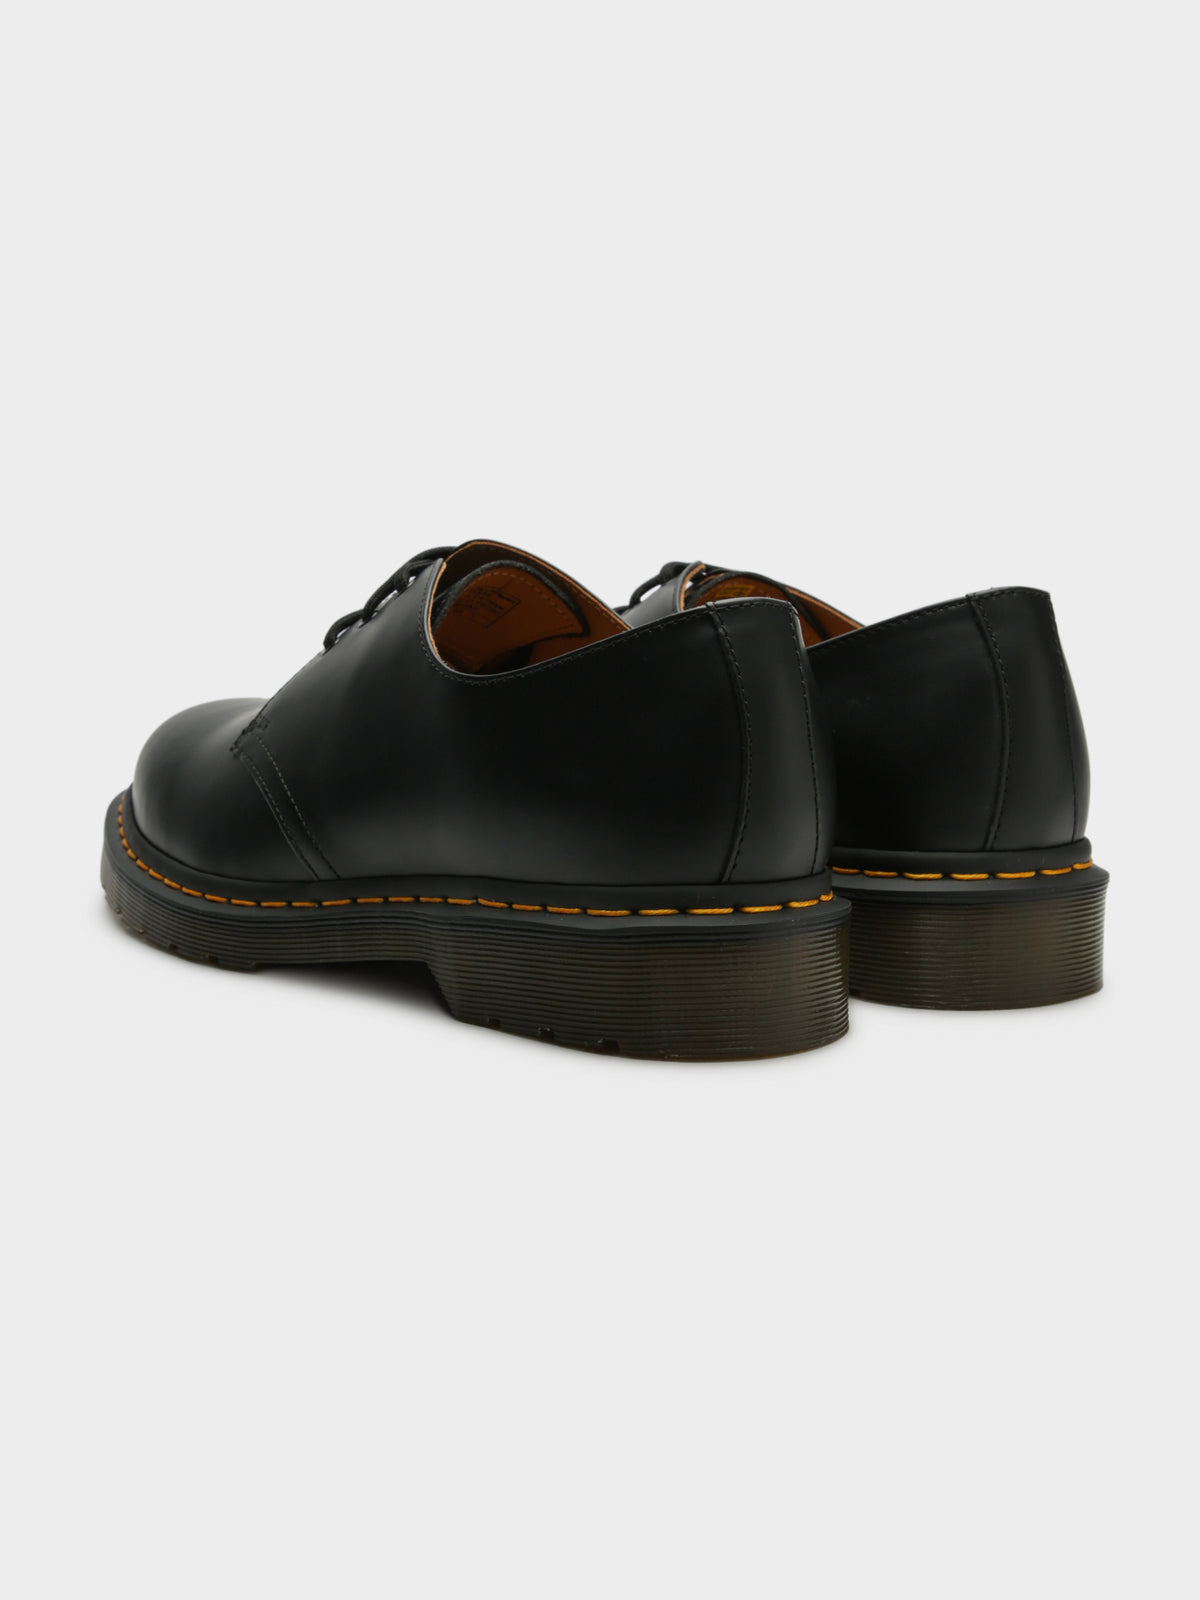 Unisex 1461 Oxford Shoes in Smooth Black Noir Leather